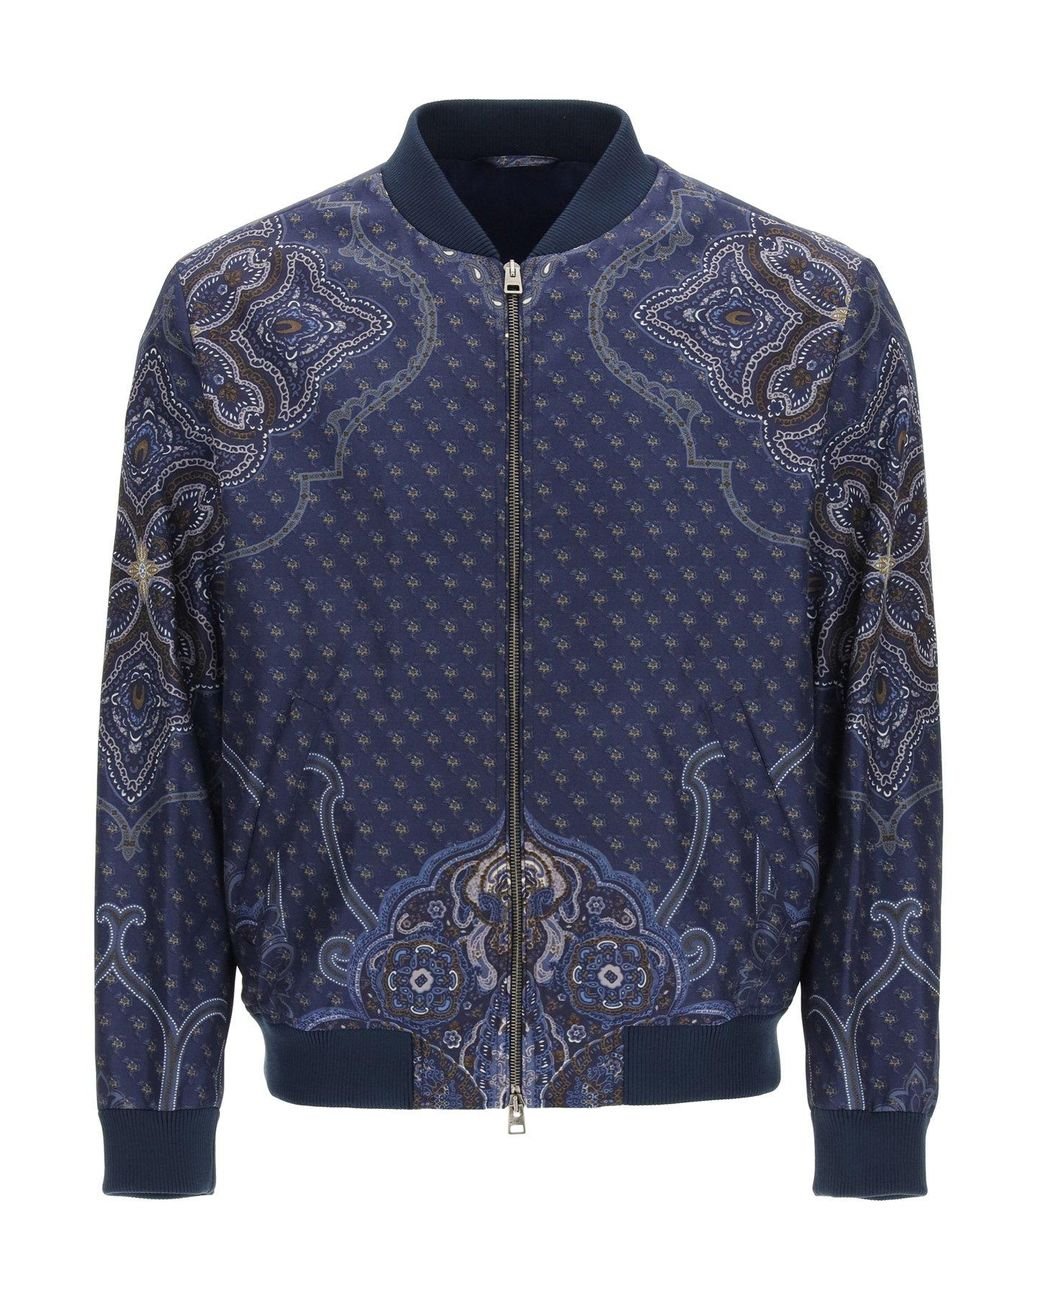 Etro Synthetic Benessere Bomber Jacket in Blue for Men - Save 13% - Lyst